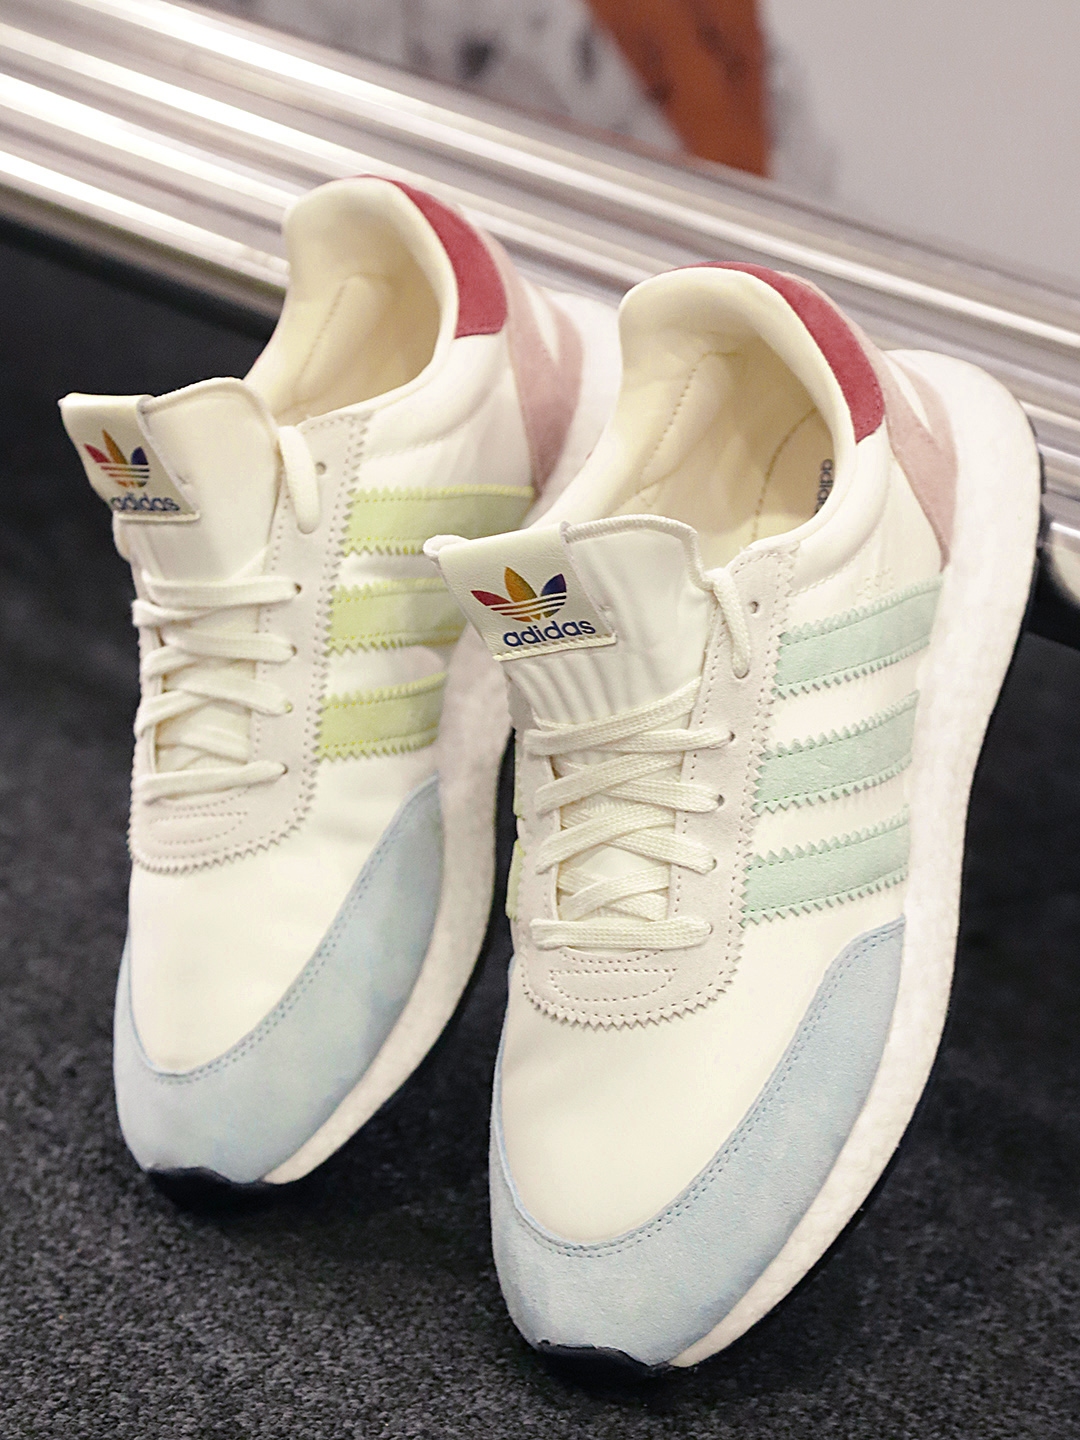 Buy ADIDAS Men Off White & Blue I 5923 Pride Sneakers - Casual Shoes Men 6792357 | Myntra